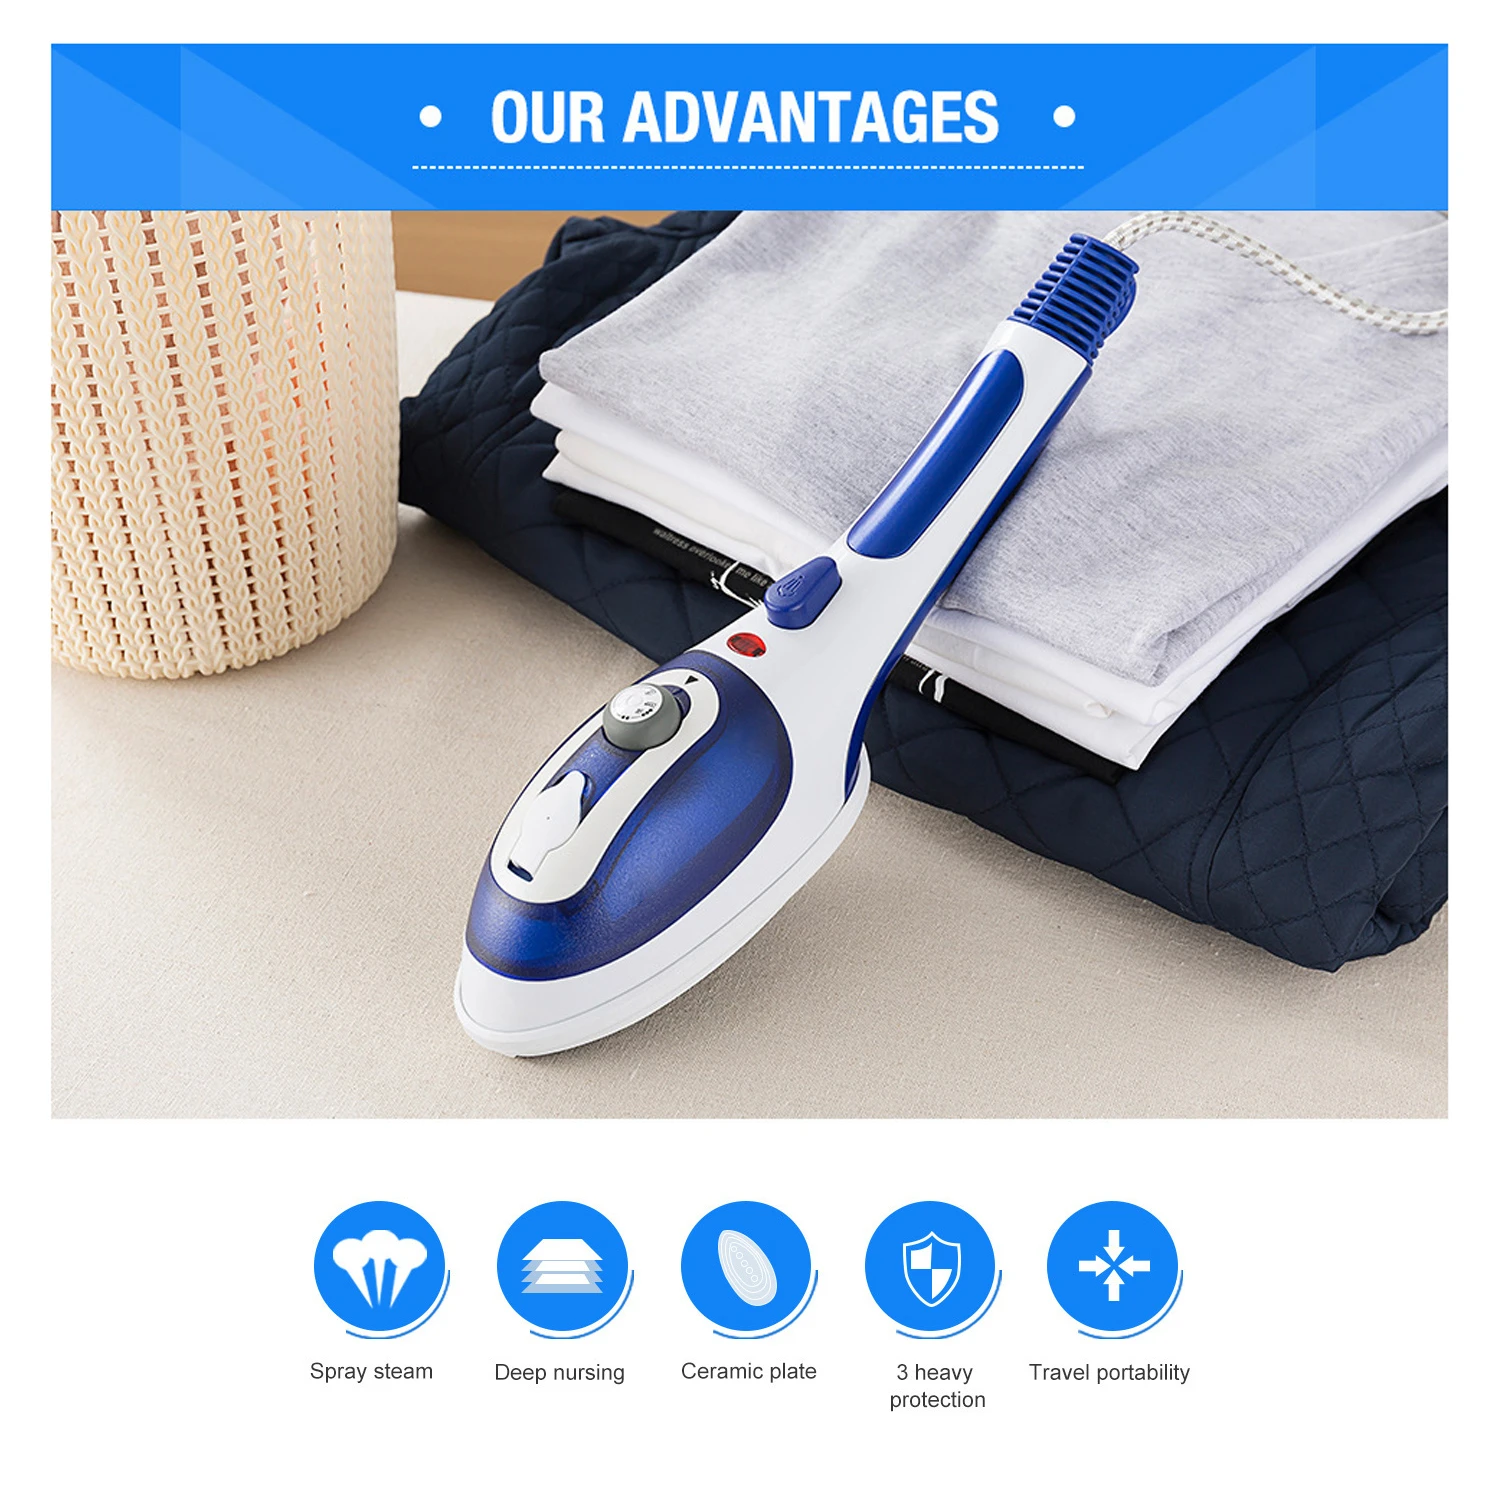 2020 Amazon Top Sell Portable Garment Steamer Cloth Flat Iron Steam for Home Travel 180ml Tank Hanger Steam Electric Iron